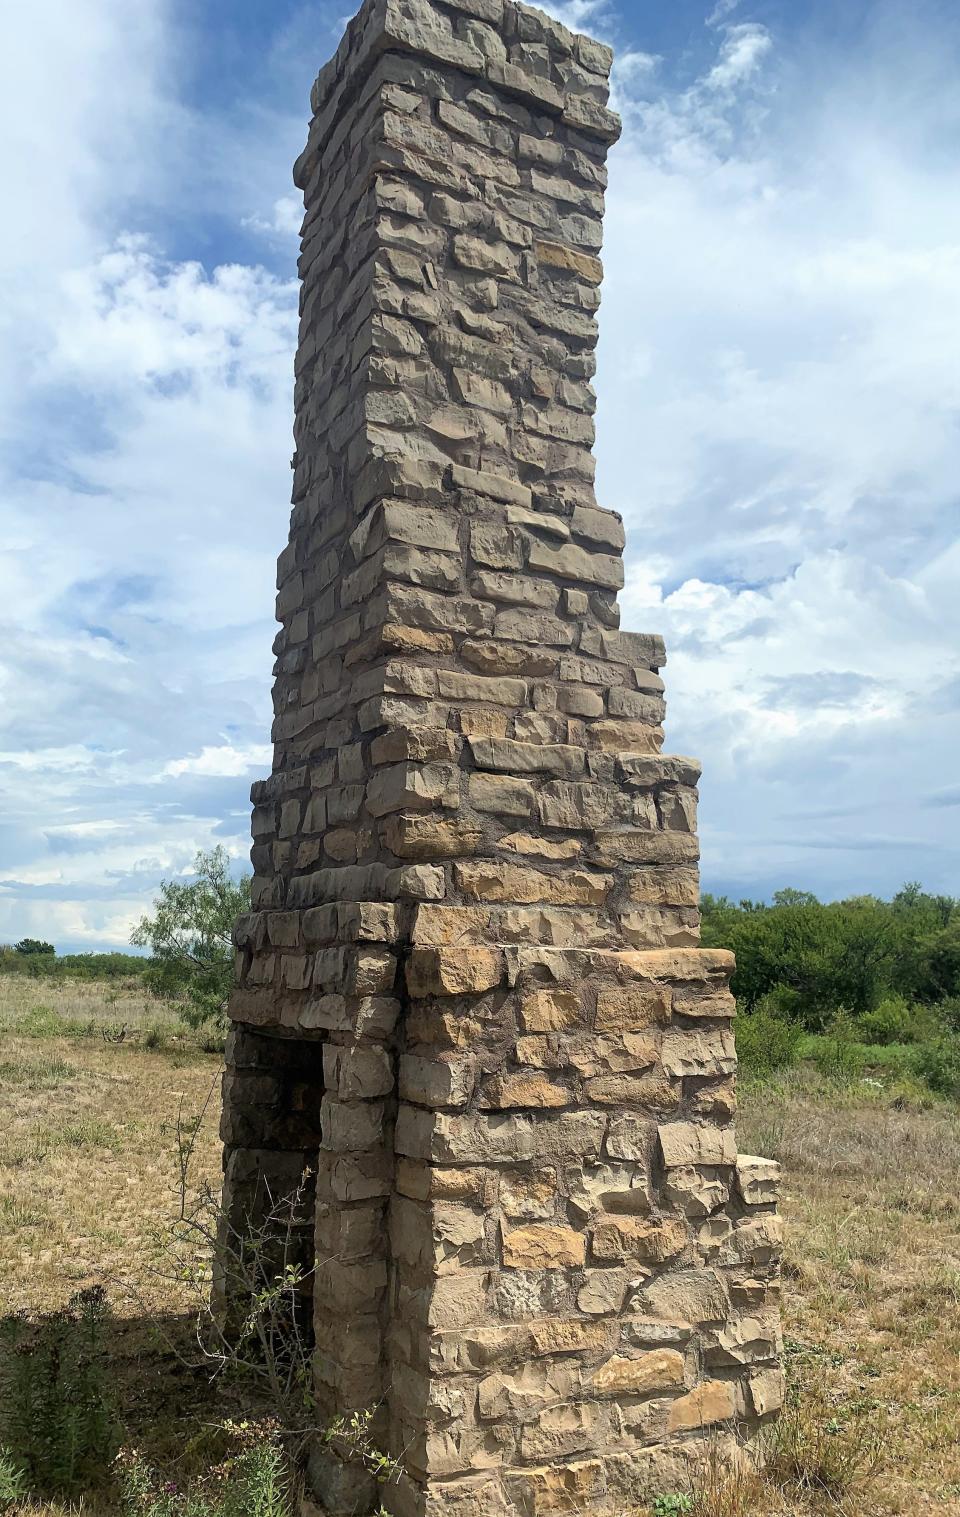 A replica of a chimney often scene on Texas prairie was built at Chimney Creek ranch near the location of Smith's Station.